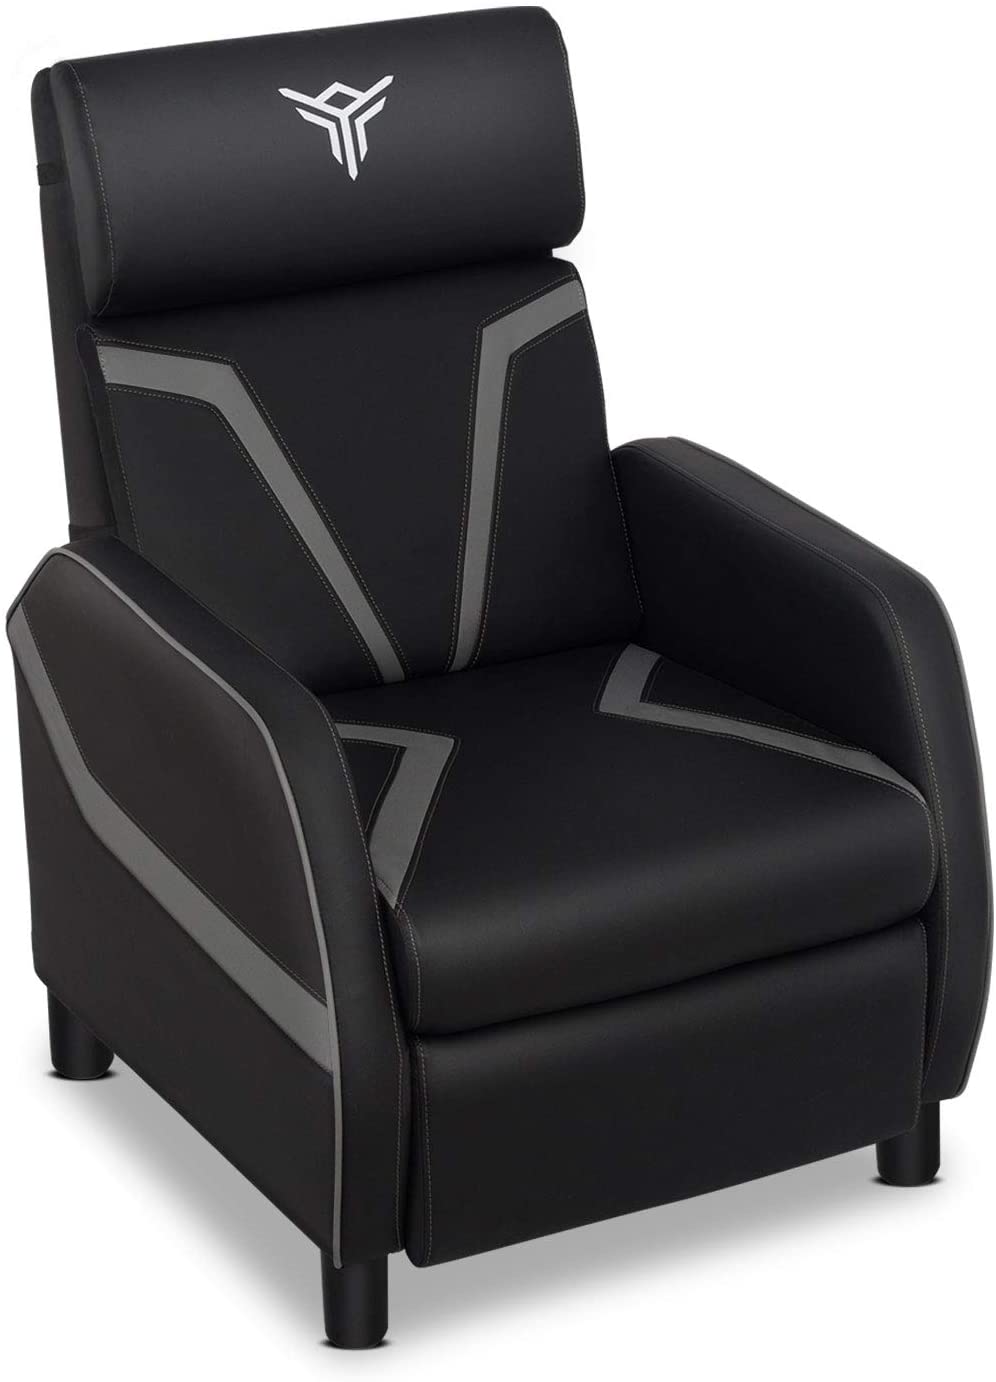 Ultra Gaming Recliner Chair